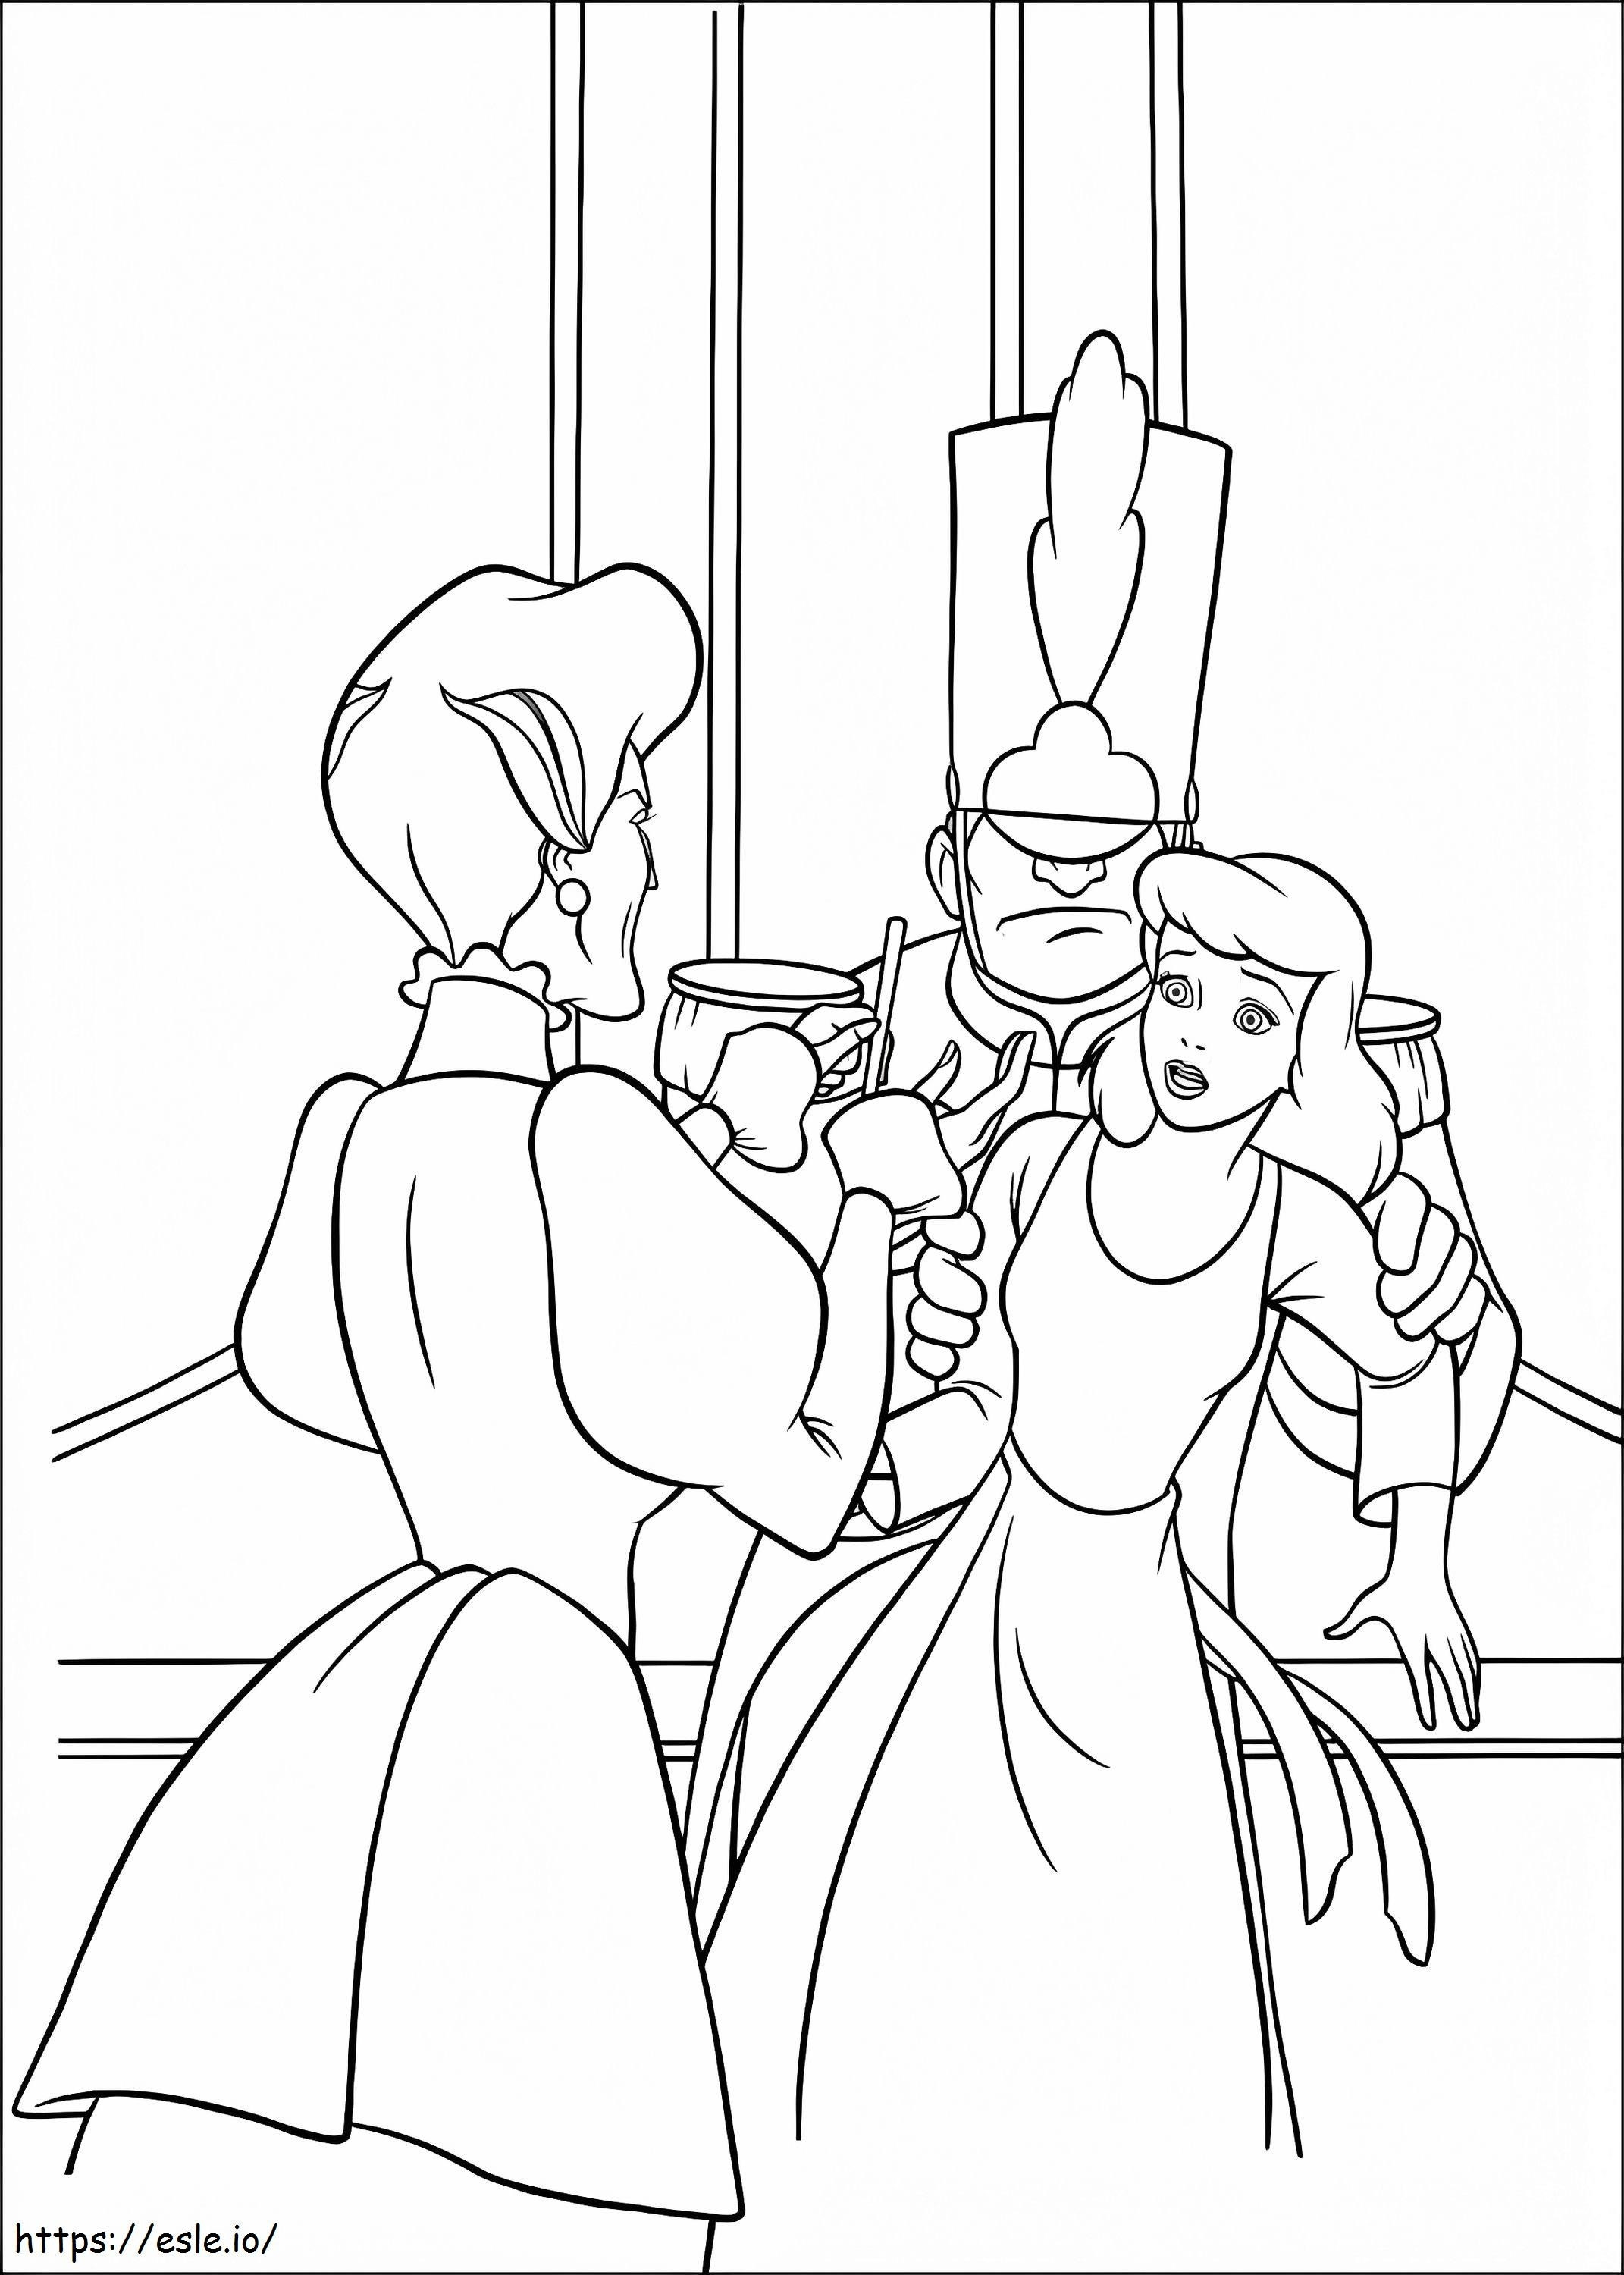 Cinderella For Kids coloring page